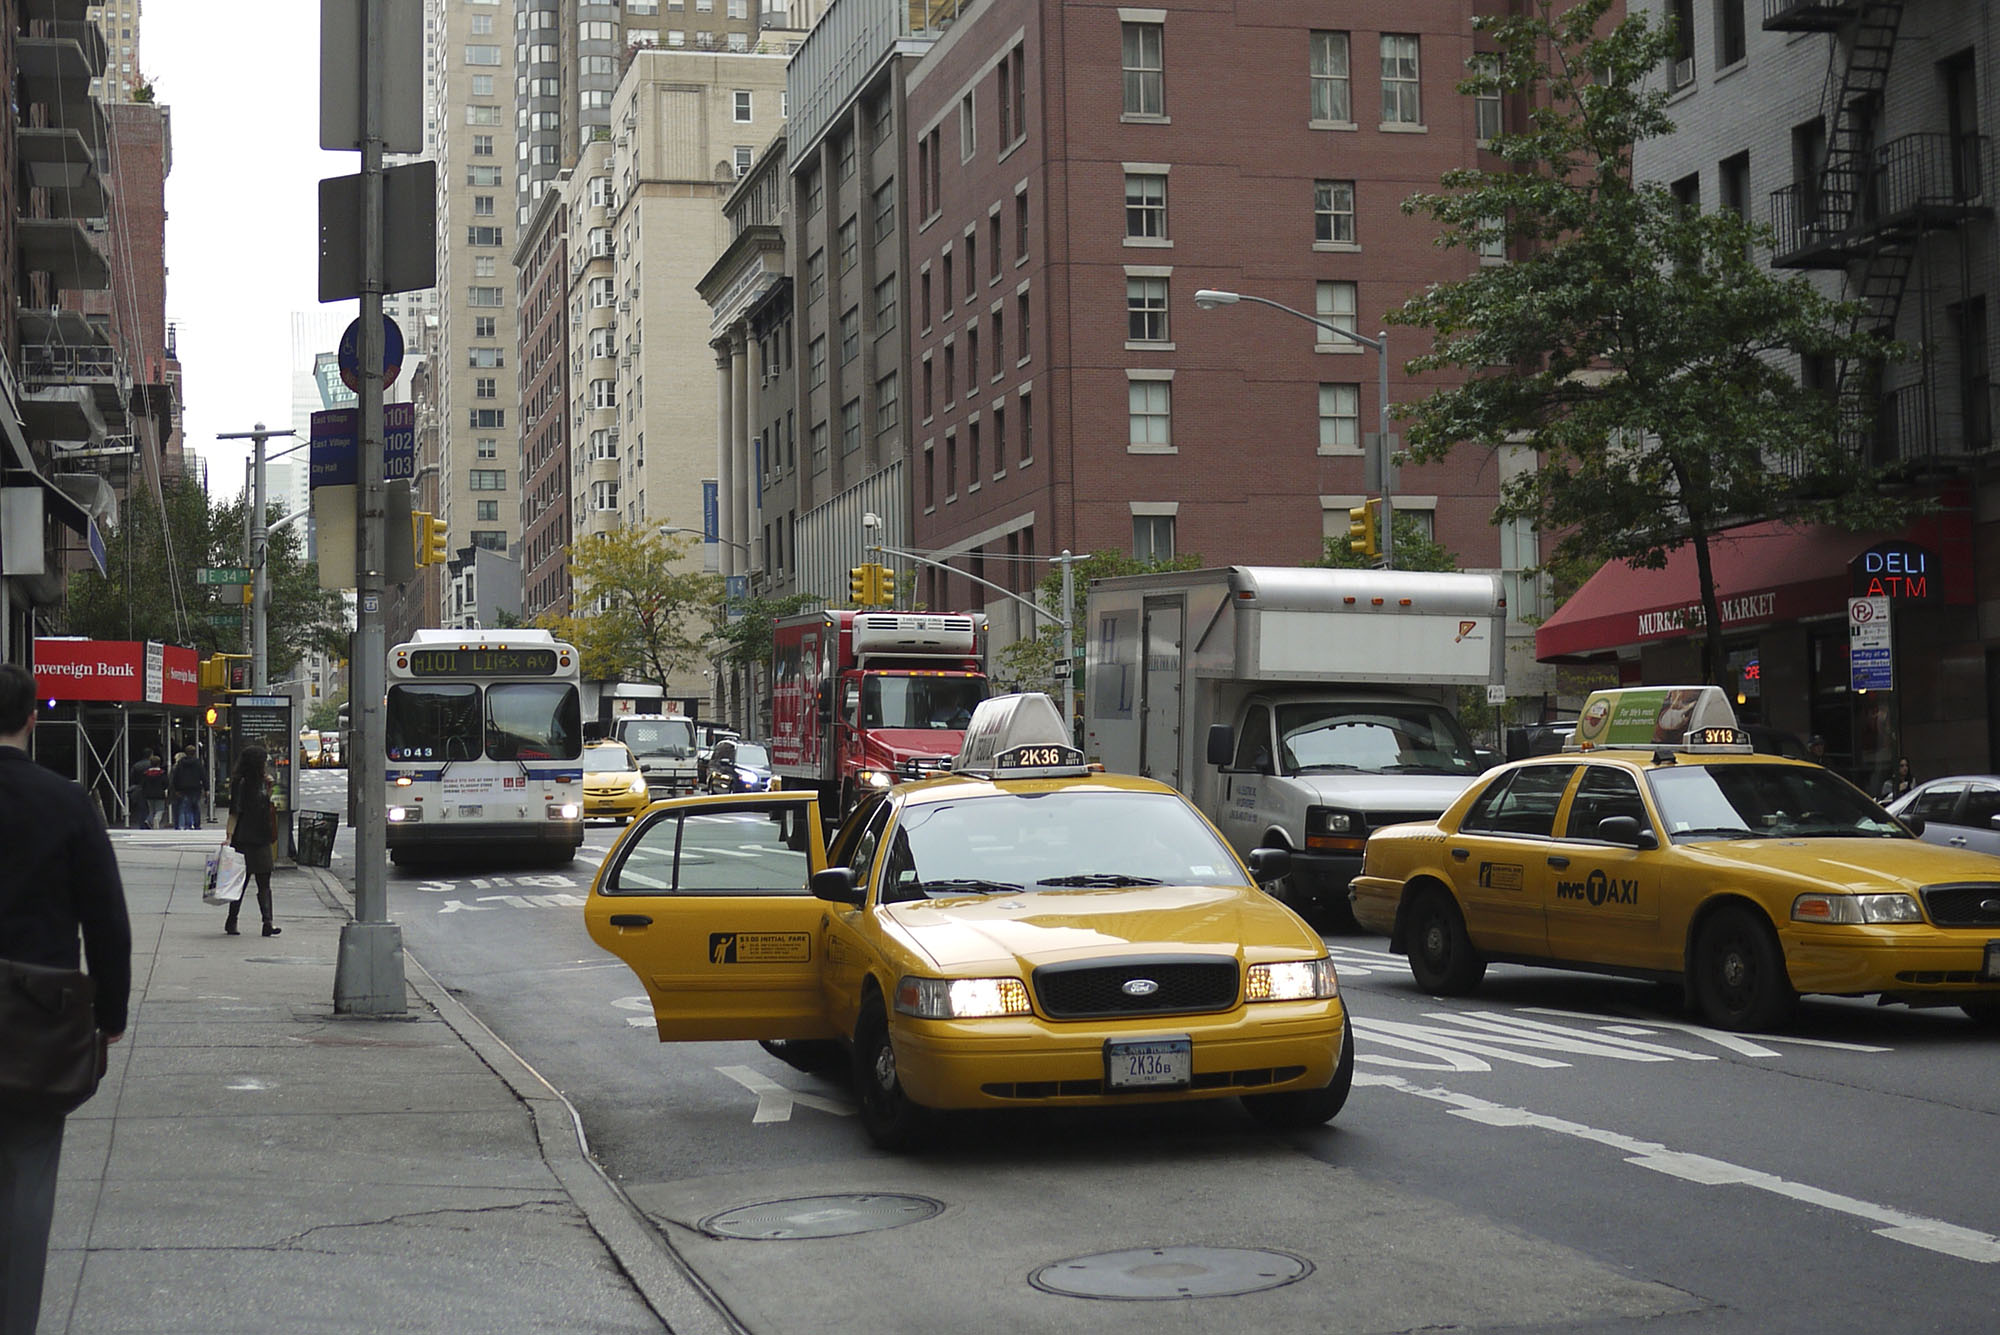 Fig. 22.22 Curbside bus lanes often fail due to traffic congestion and poor enforcement (New York City).